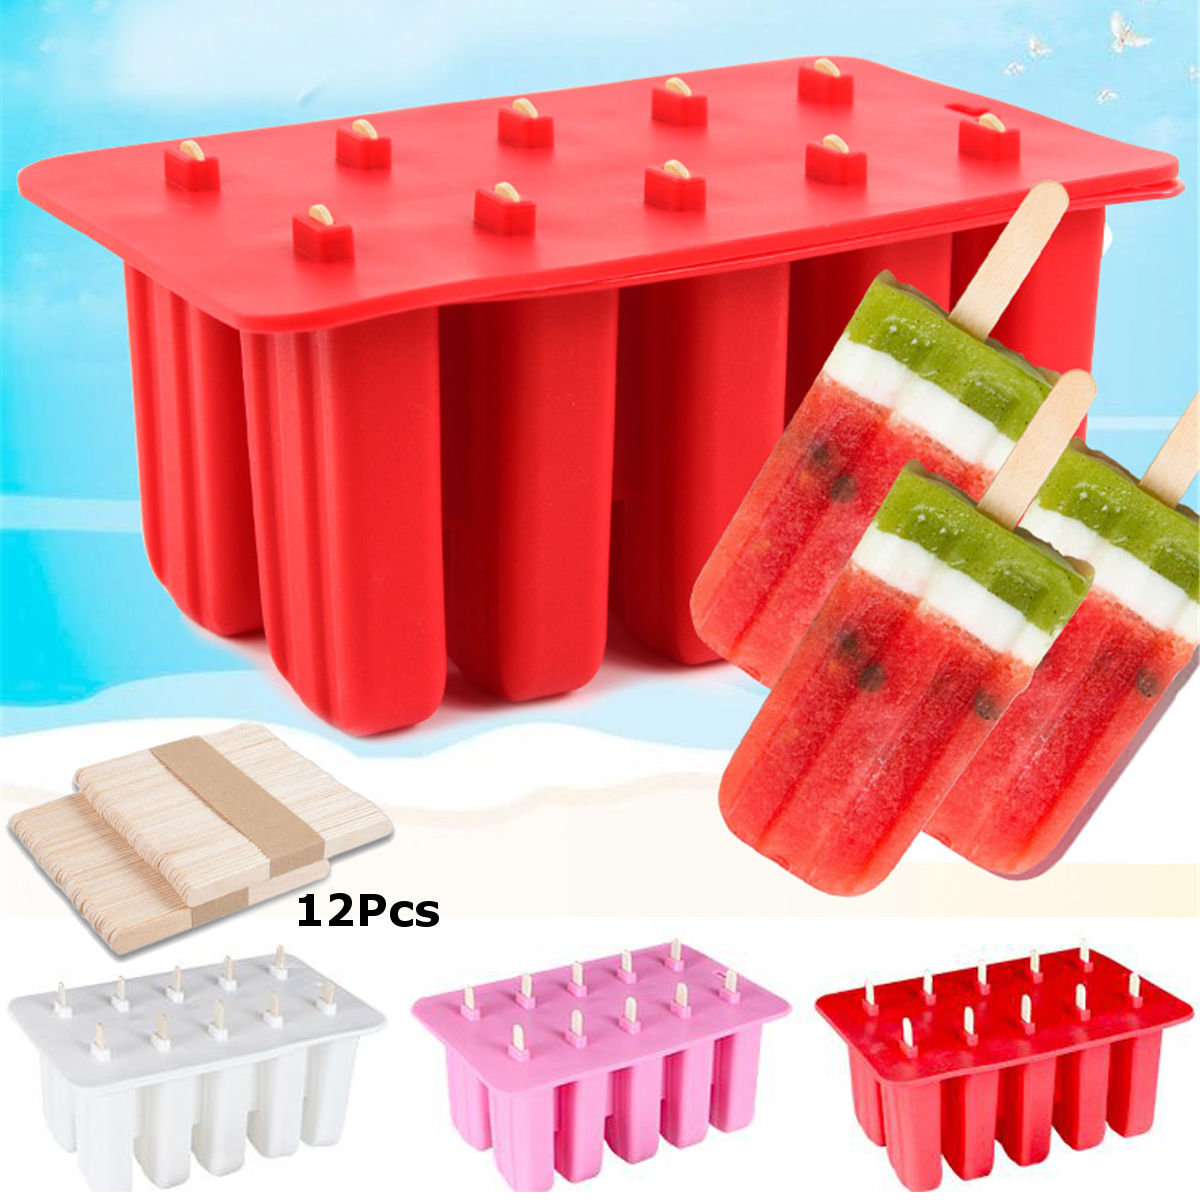 

10 Grids Silicone Popsicle Mold Ice Cream Tray, Pink